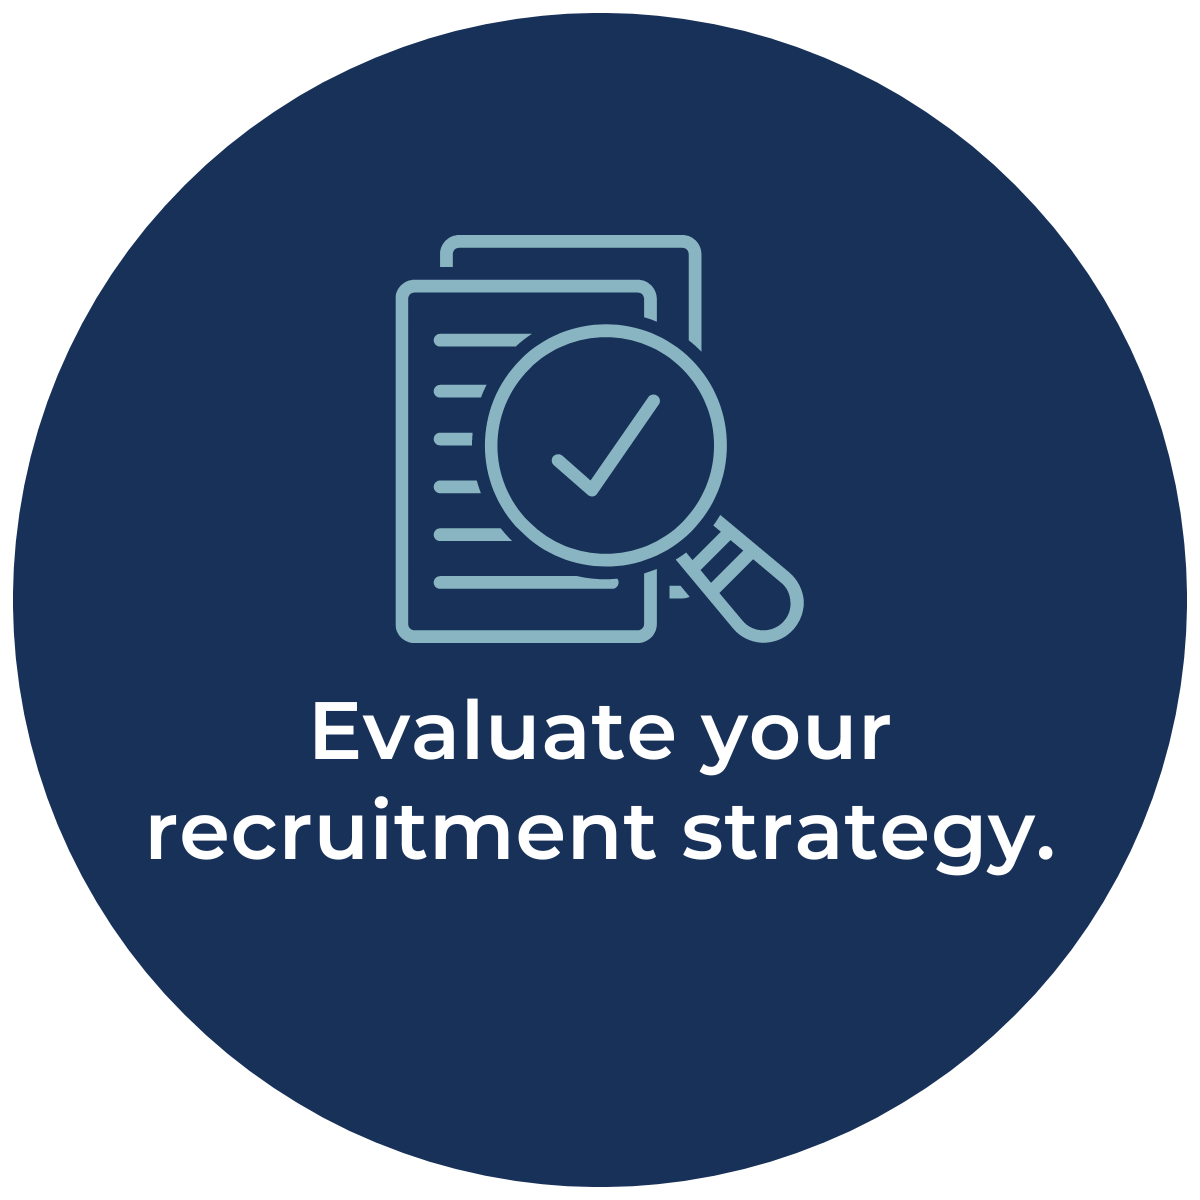 Evaluate your recruitment strategy.